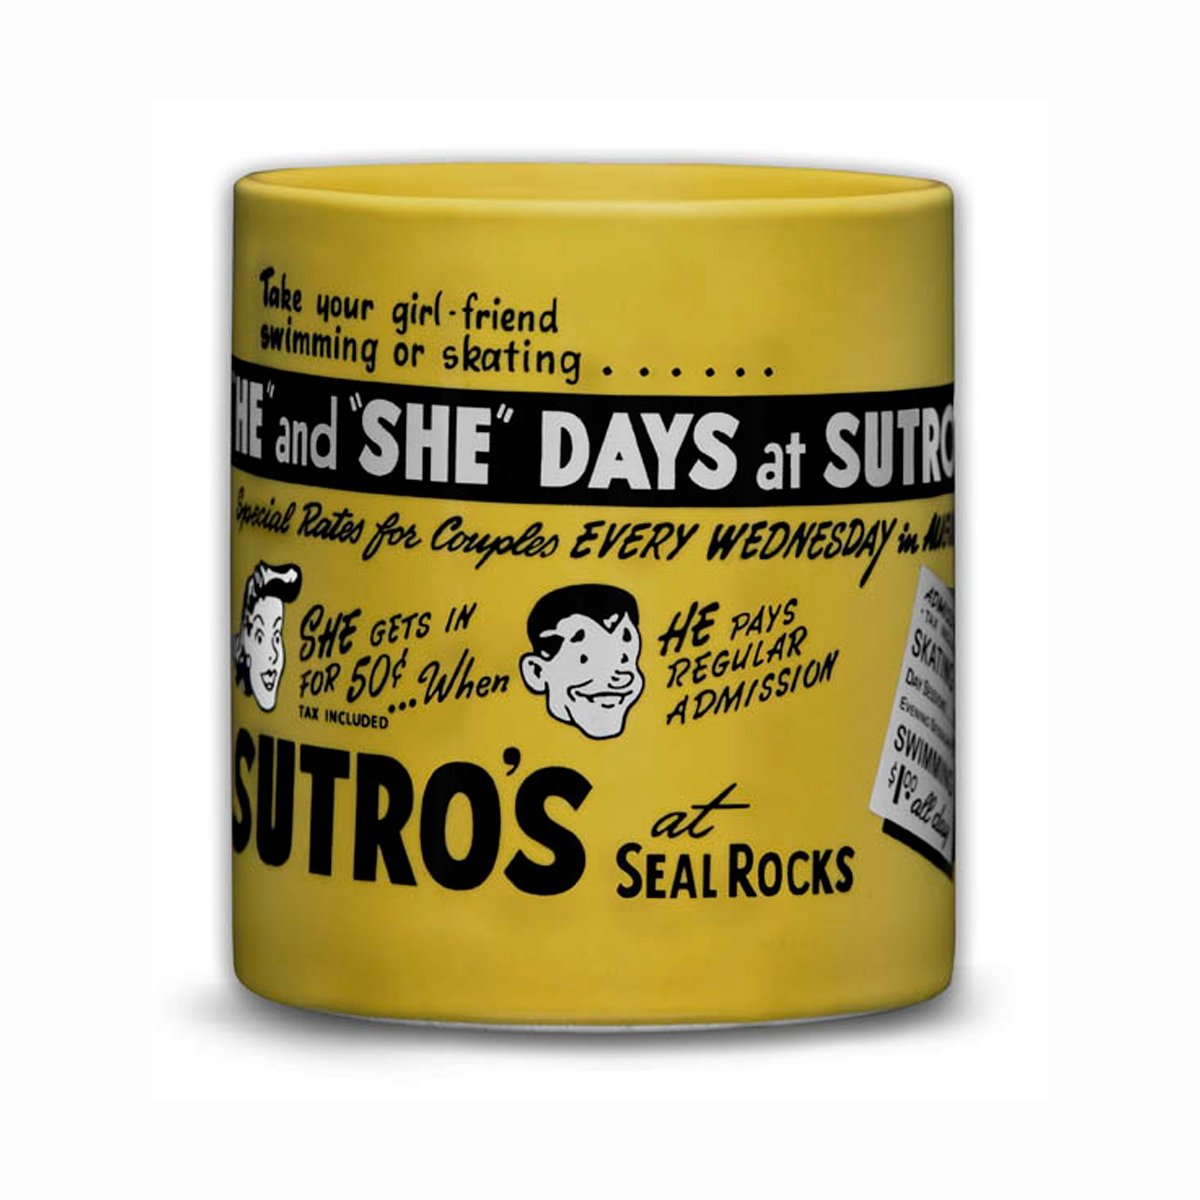 Oversize yellow mug with black and white cartoon drawings of a man’s and woman’s face and accompanying text, based on vintage advertisements for “He” and “She” Days at Sutro Baths.